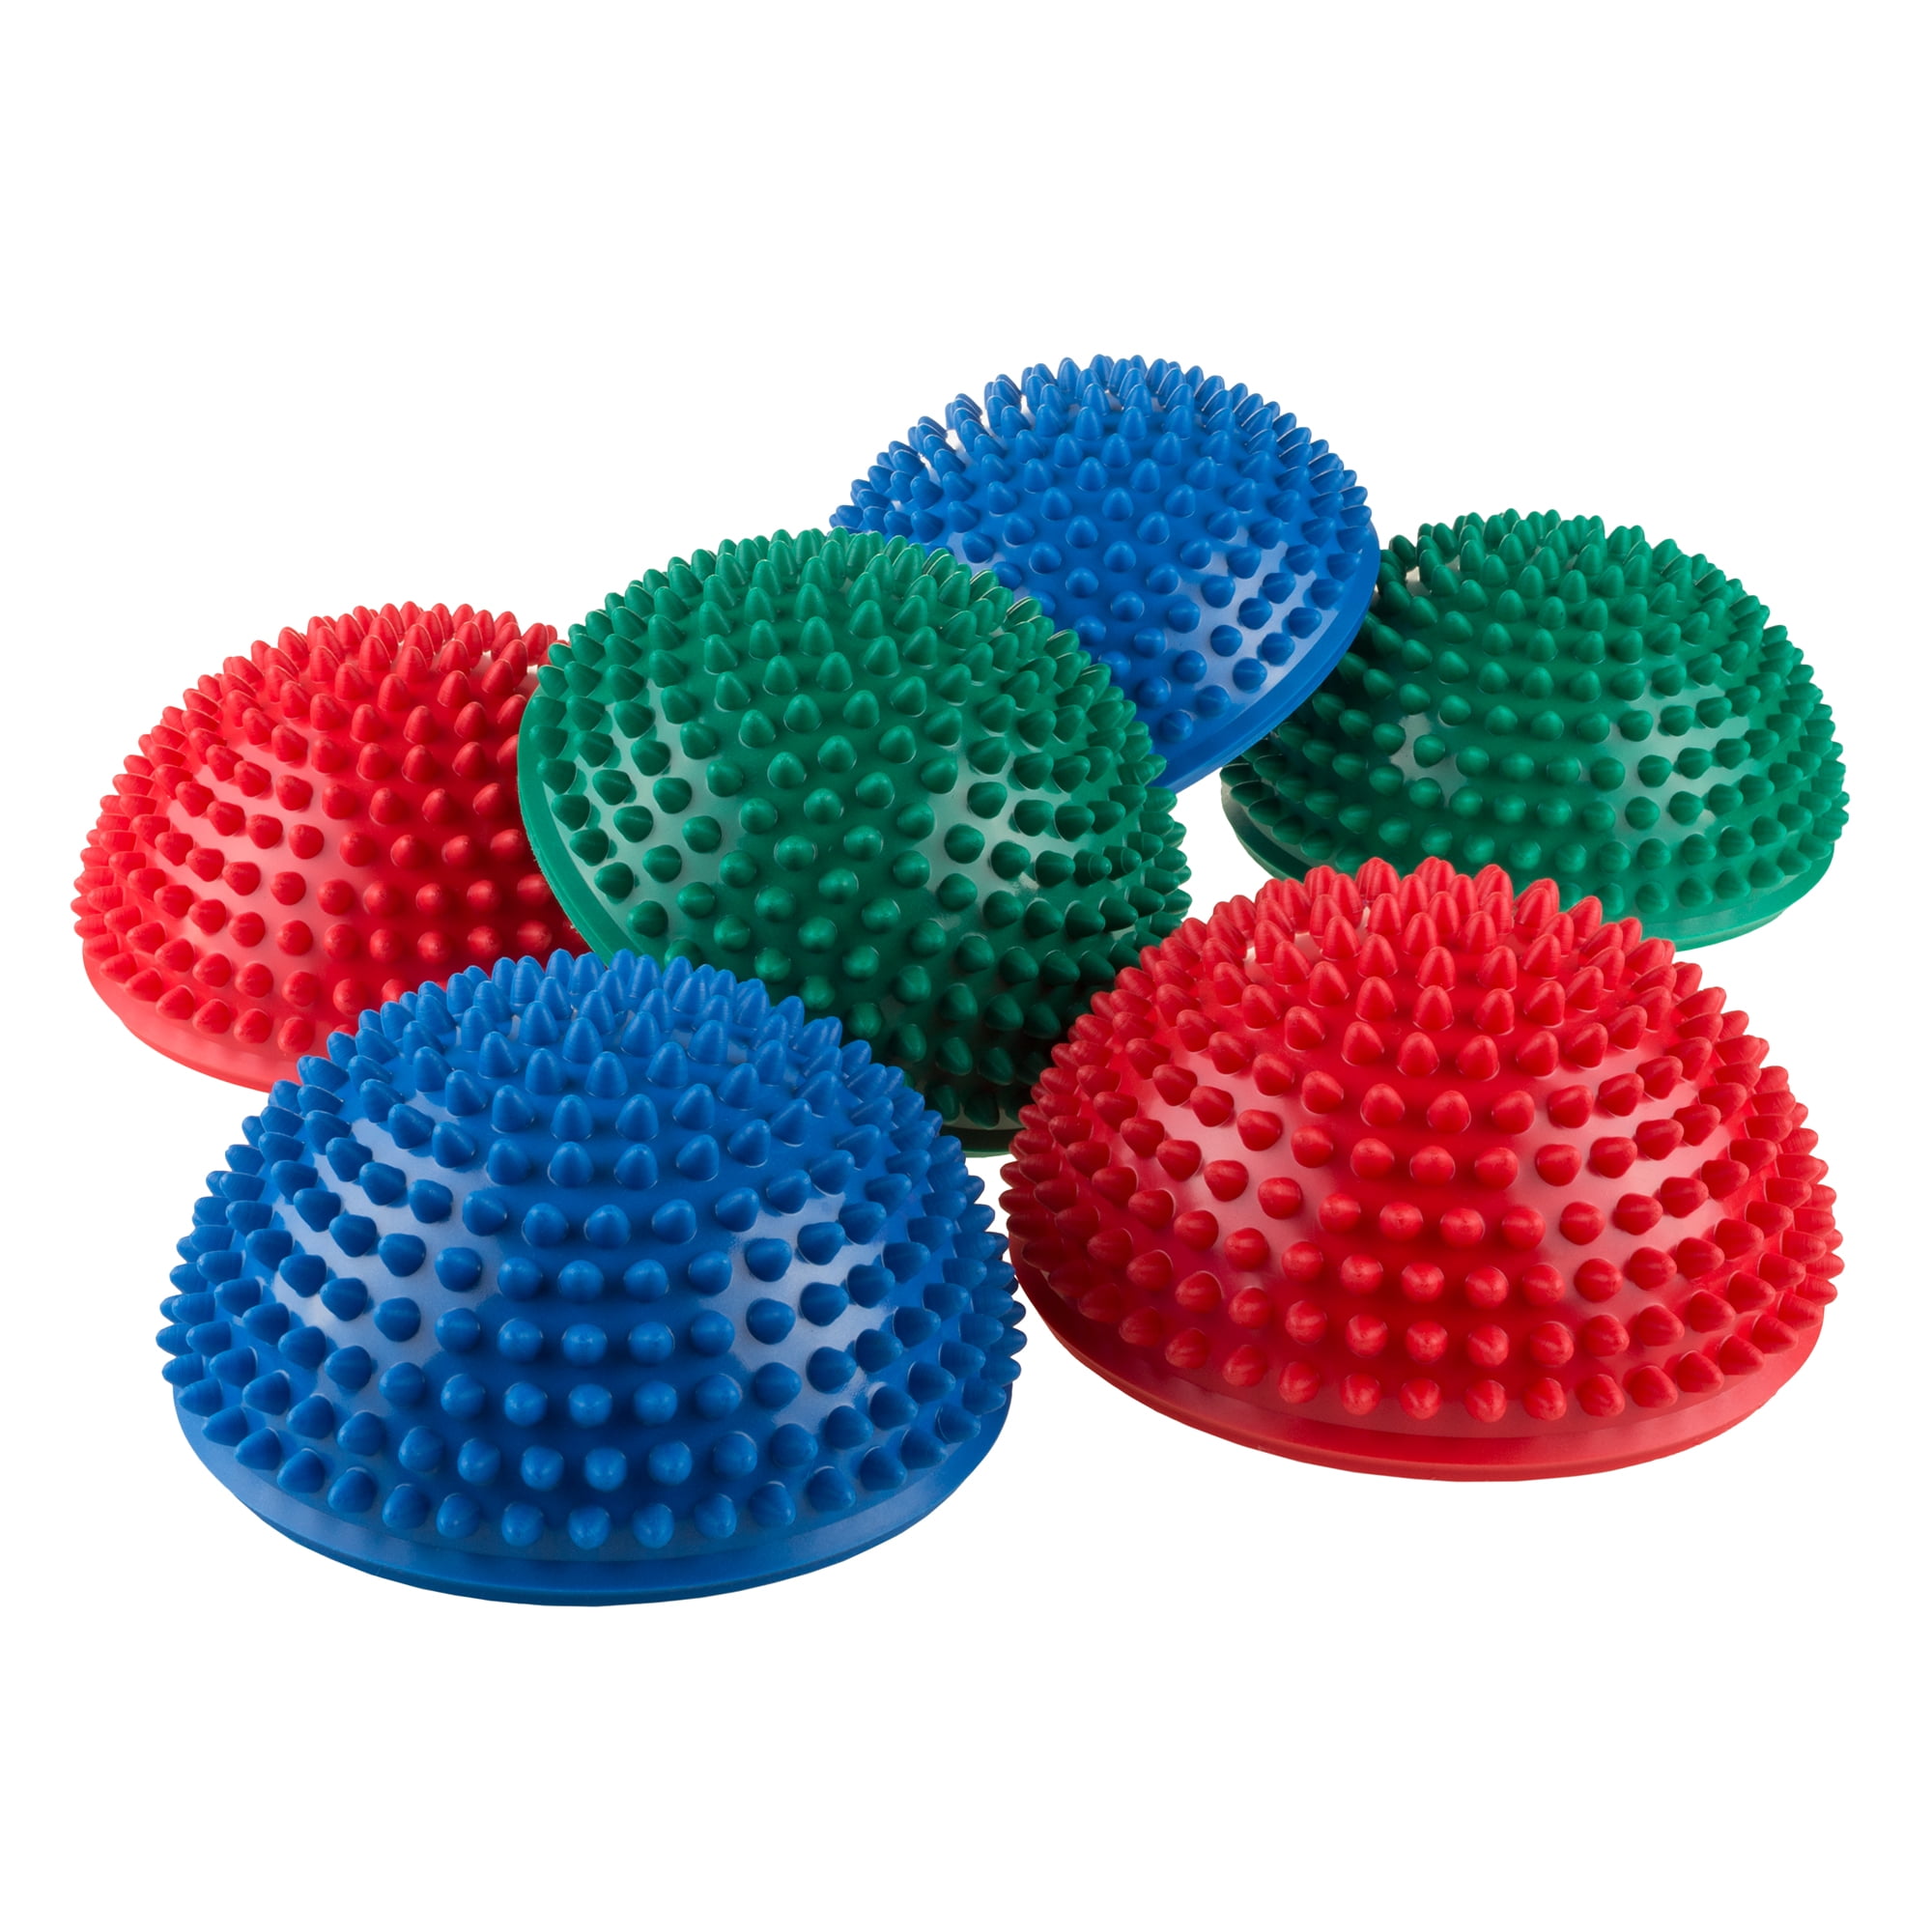 Soft Safe Children's Physical Training Toy 1Pcs Color : Yellow, Size : 3PCS Balance Stepping Stones for Kids Balance Pods- Hedgehog Style Half Dome Stepping Stones